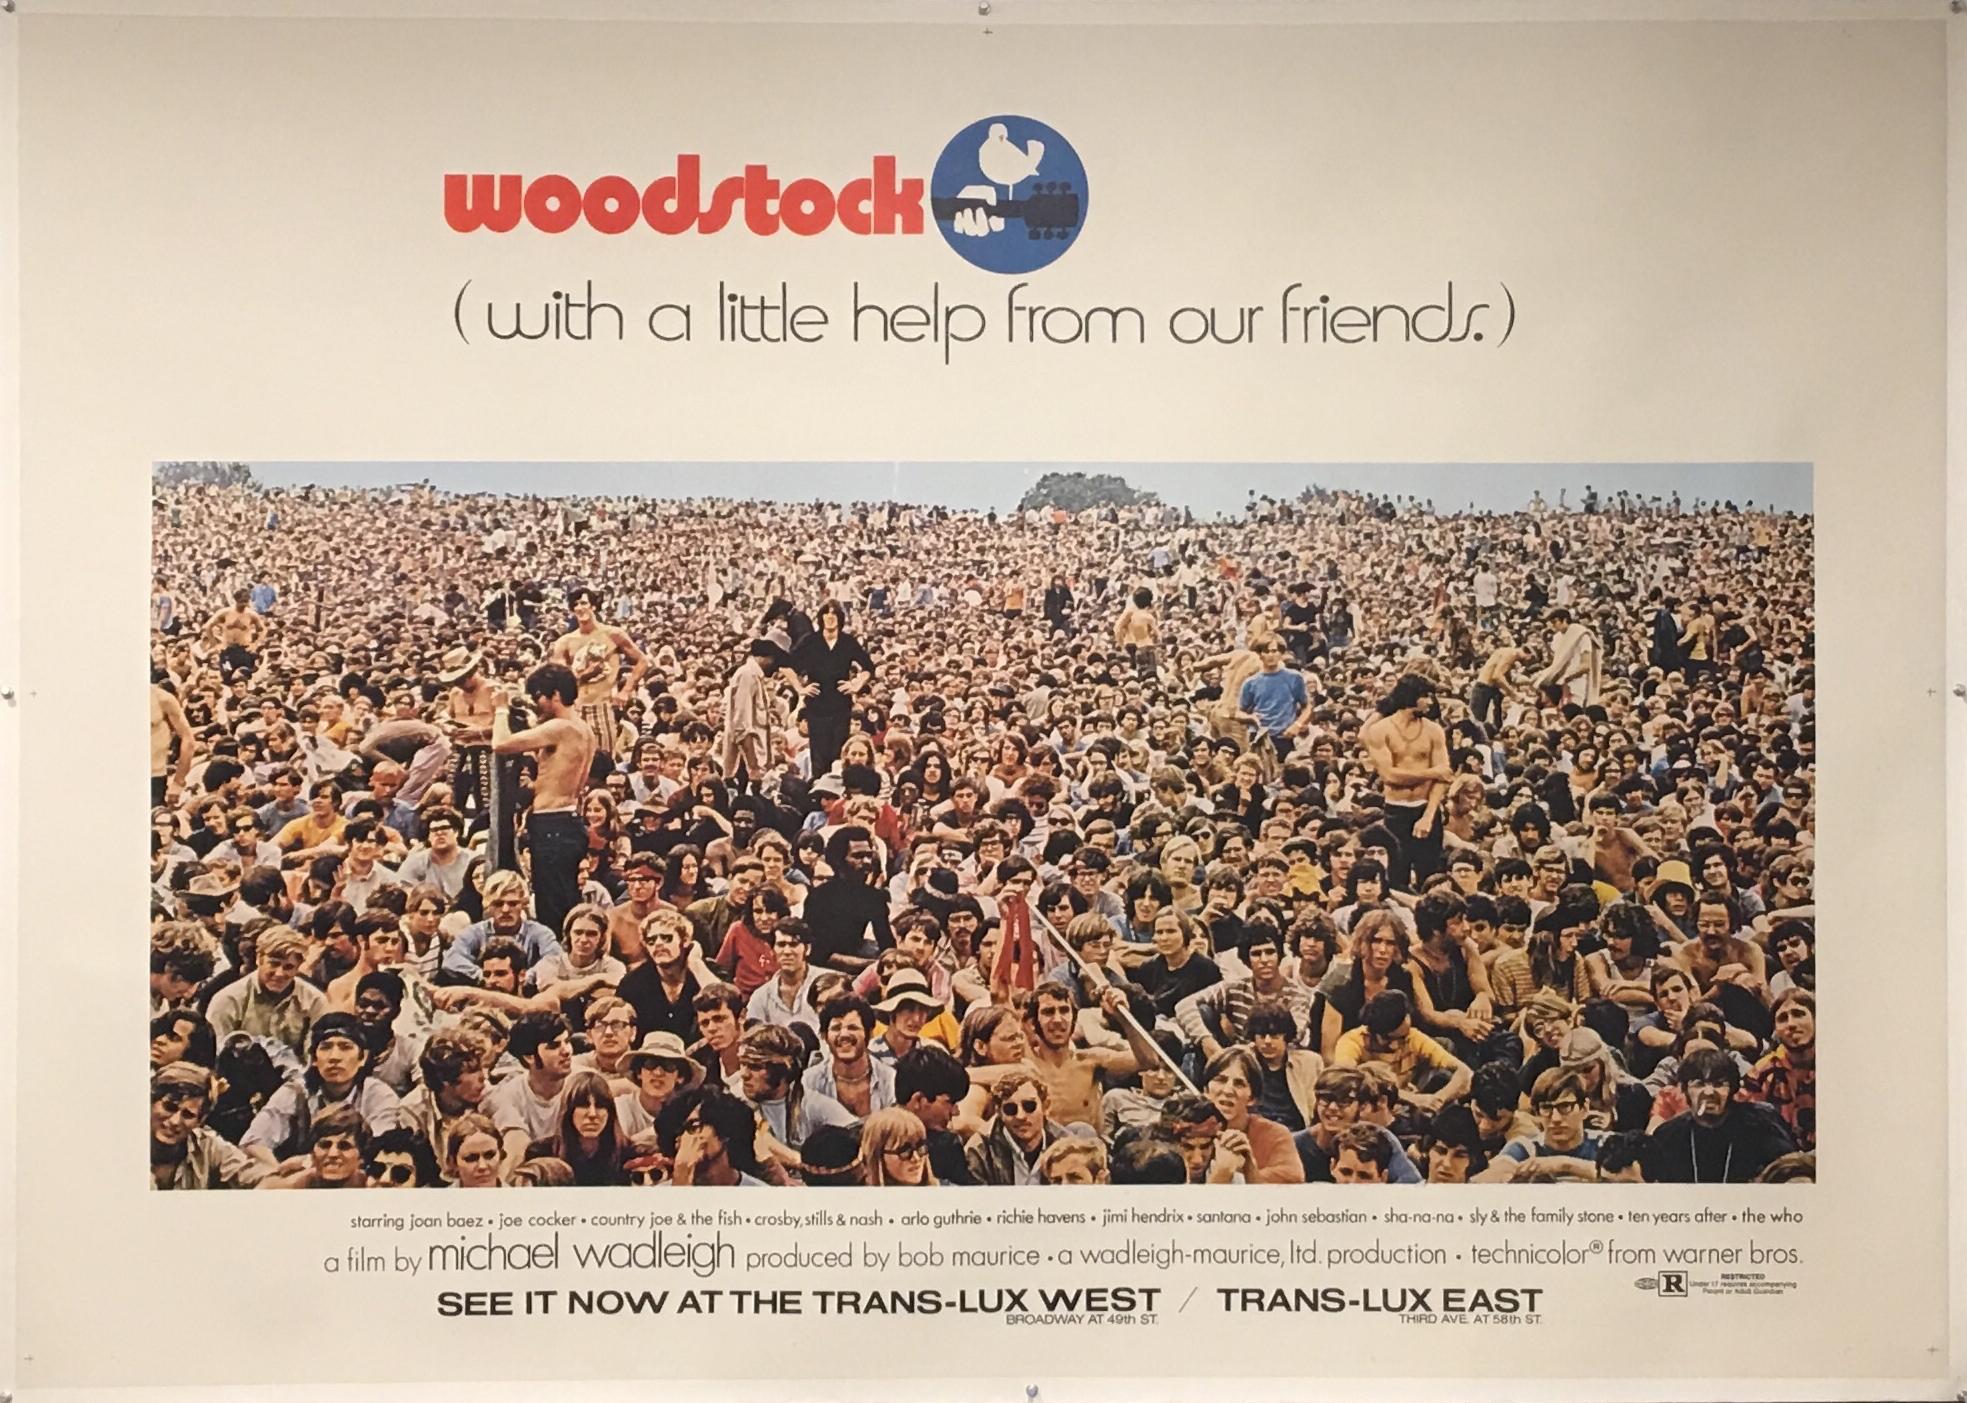 Unknown Landscape Print – WOODSTOCK RARE FILM POSTER - CROWD SCENE - 50 YEARS OLD THIS SUMMER  